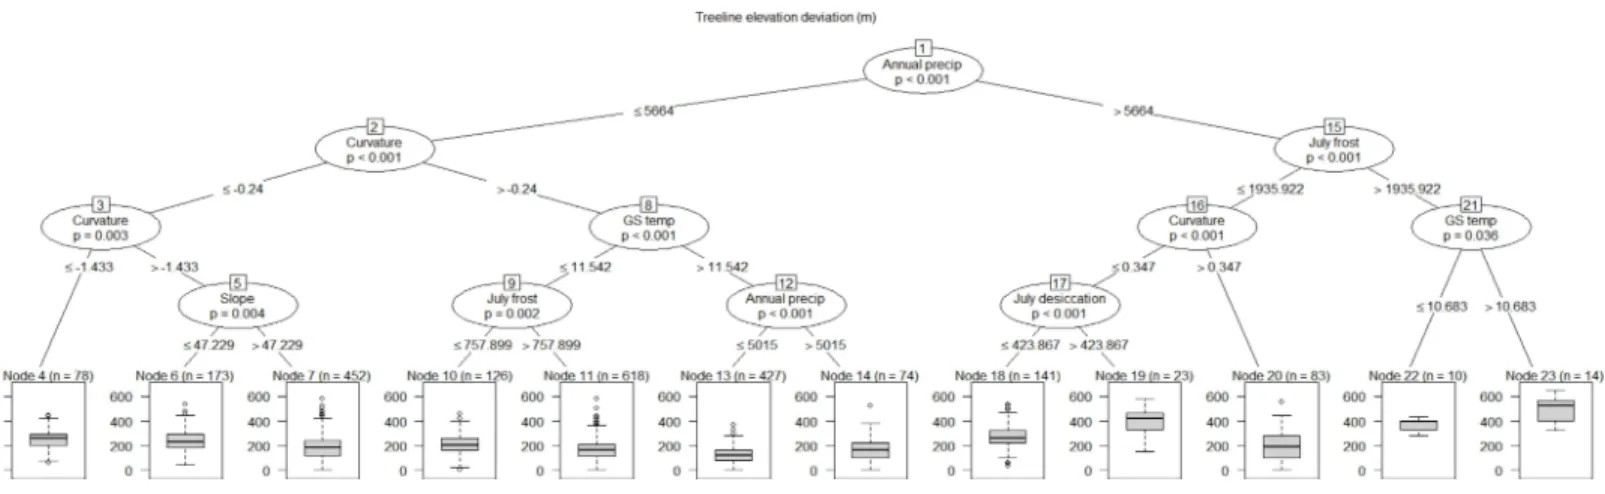 Figure 6 Conditional inference tree explaining treeline elevation deviation across 28 study areas using the 12 most important explanatory factors determined from the random forest analysis